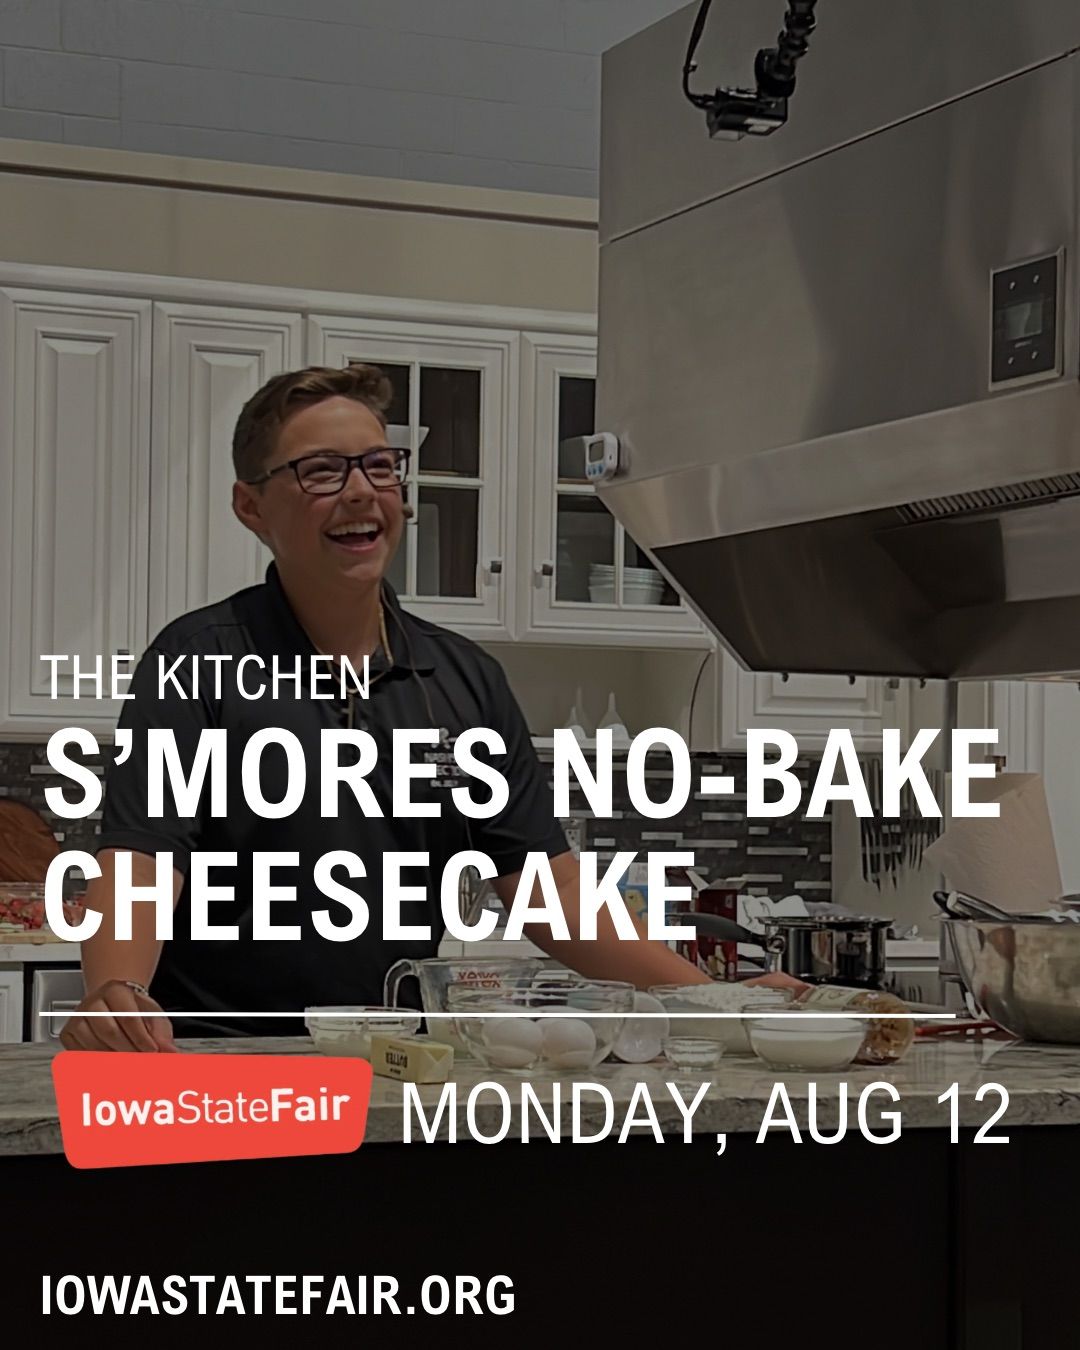 \u201cThe Kitchen\u201d Demonstration with Nash Roe at the Iowa State Fair!